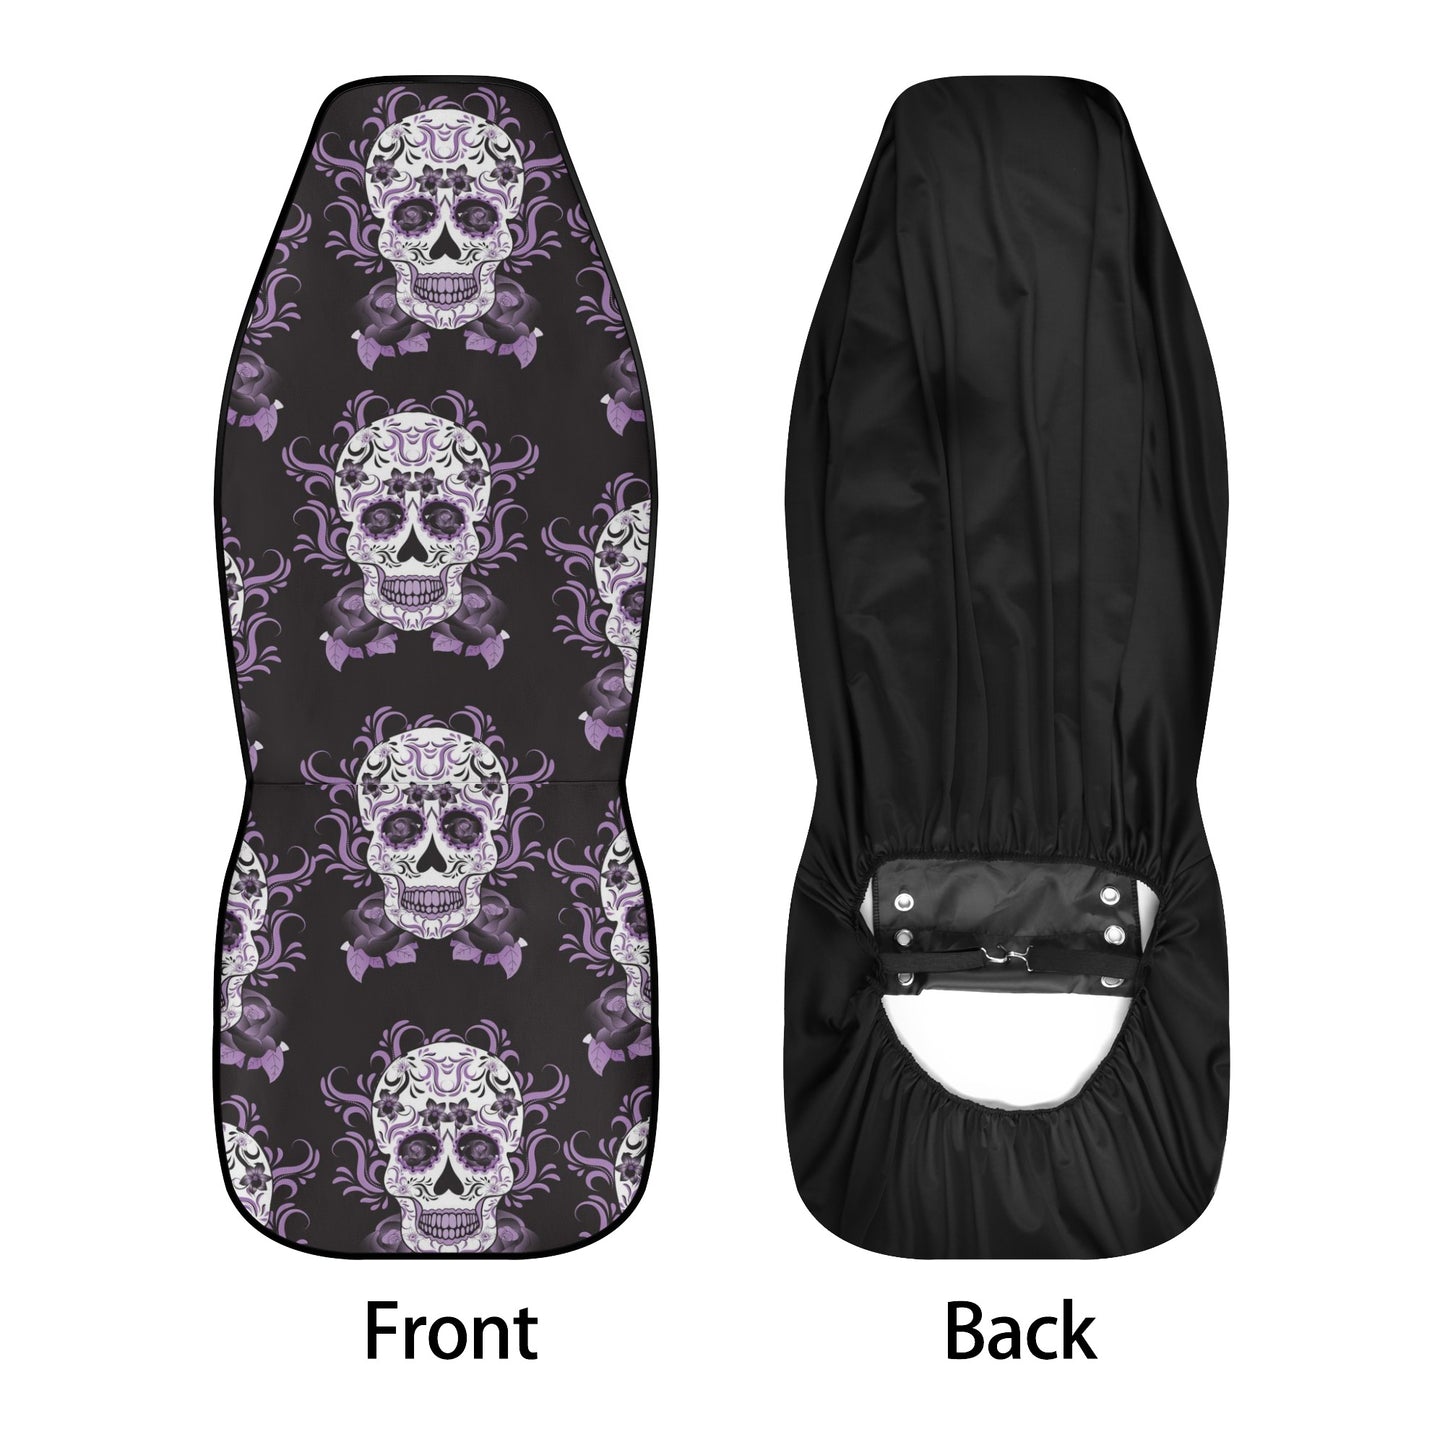 Floral skull car tool, mexican skull car seat tool, day of the dead car rug, sugar skull girl washable car seat covers, calaveras skull seat